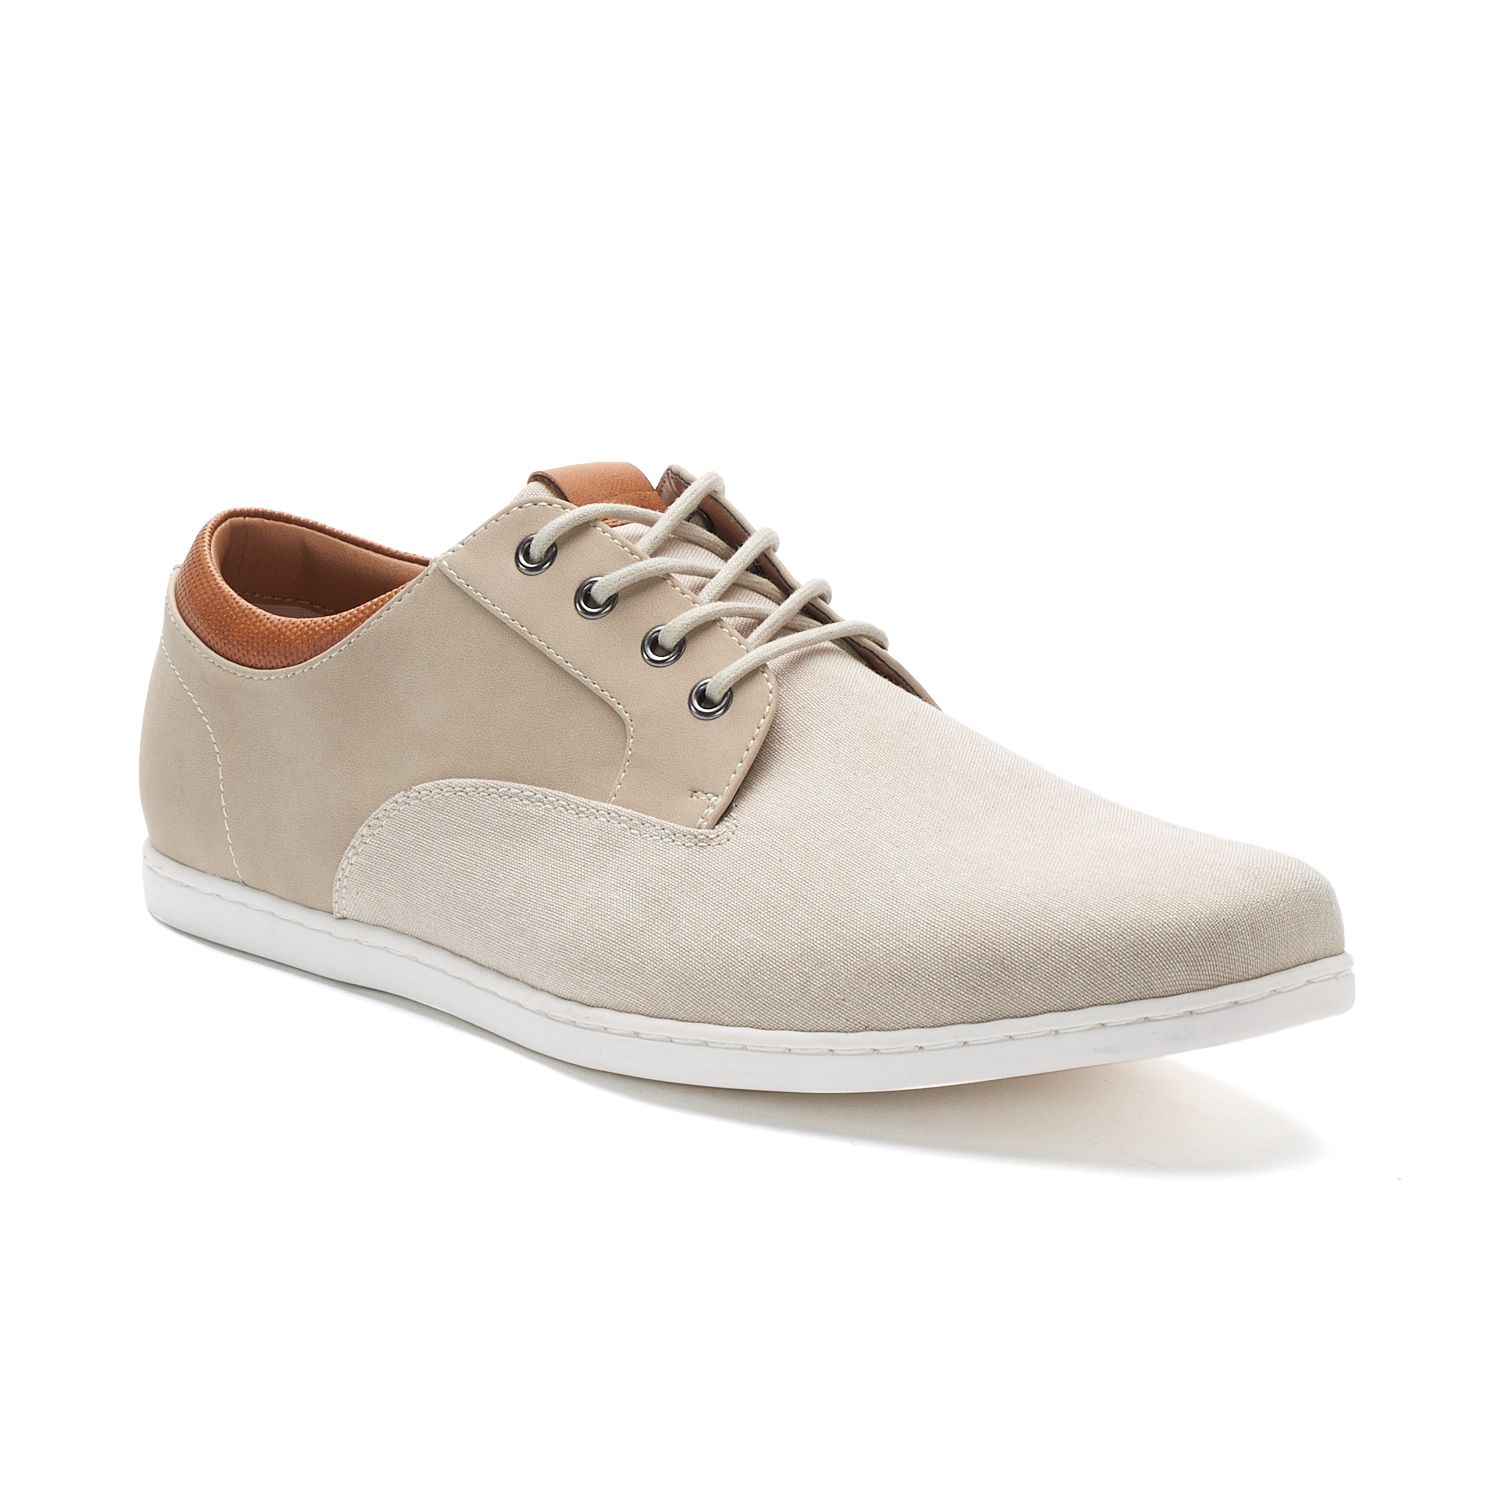 Life® Lyden Men's Casual Oxford Shoes